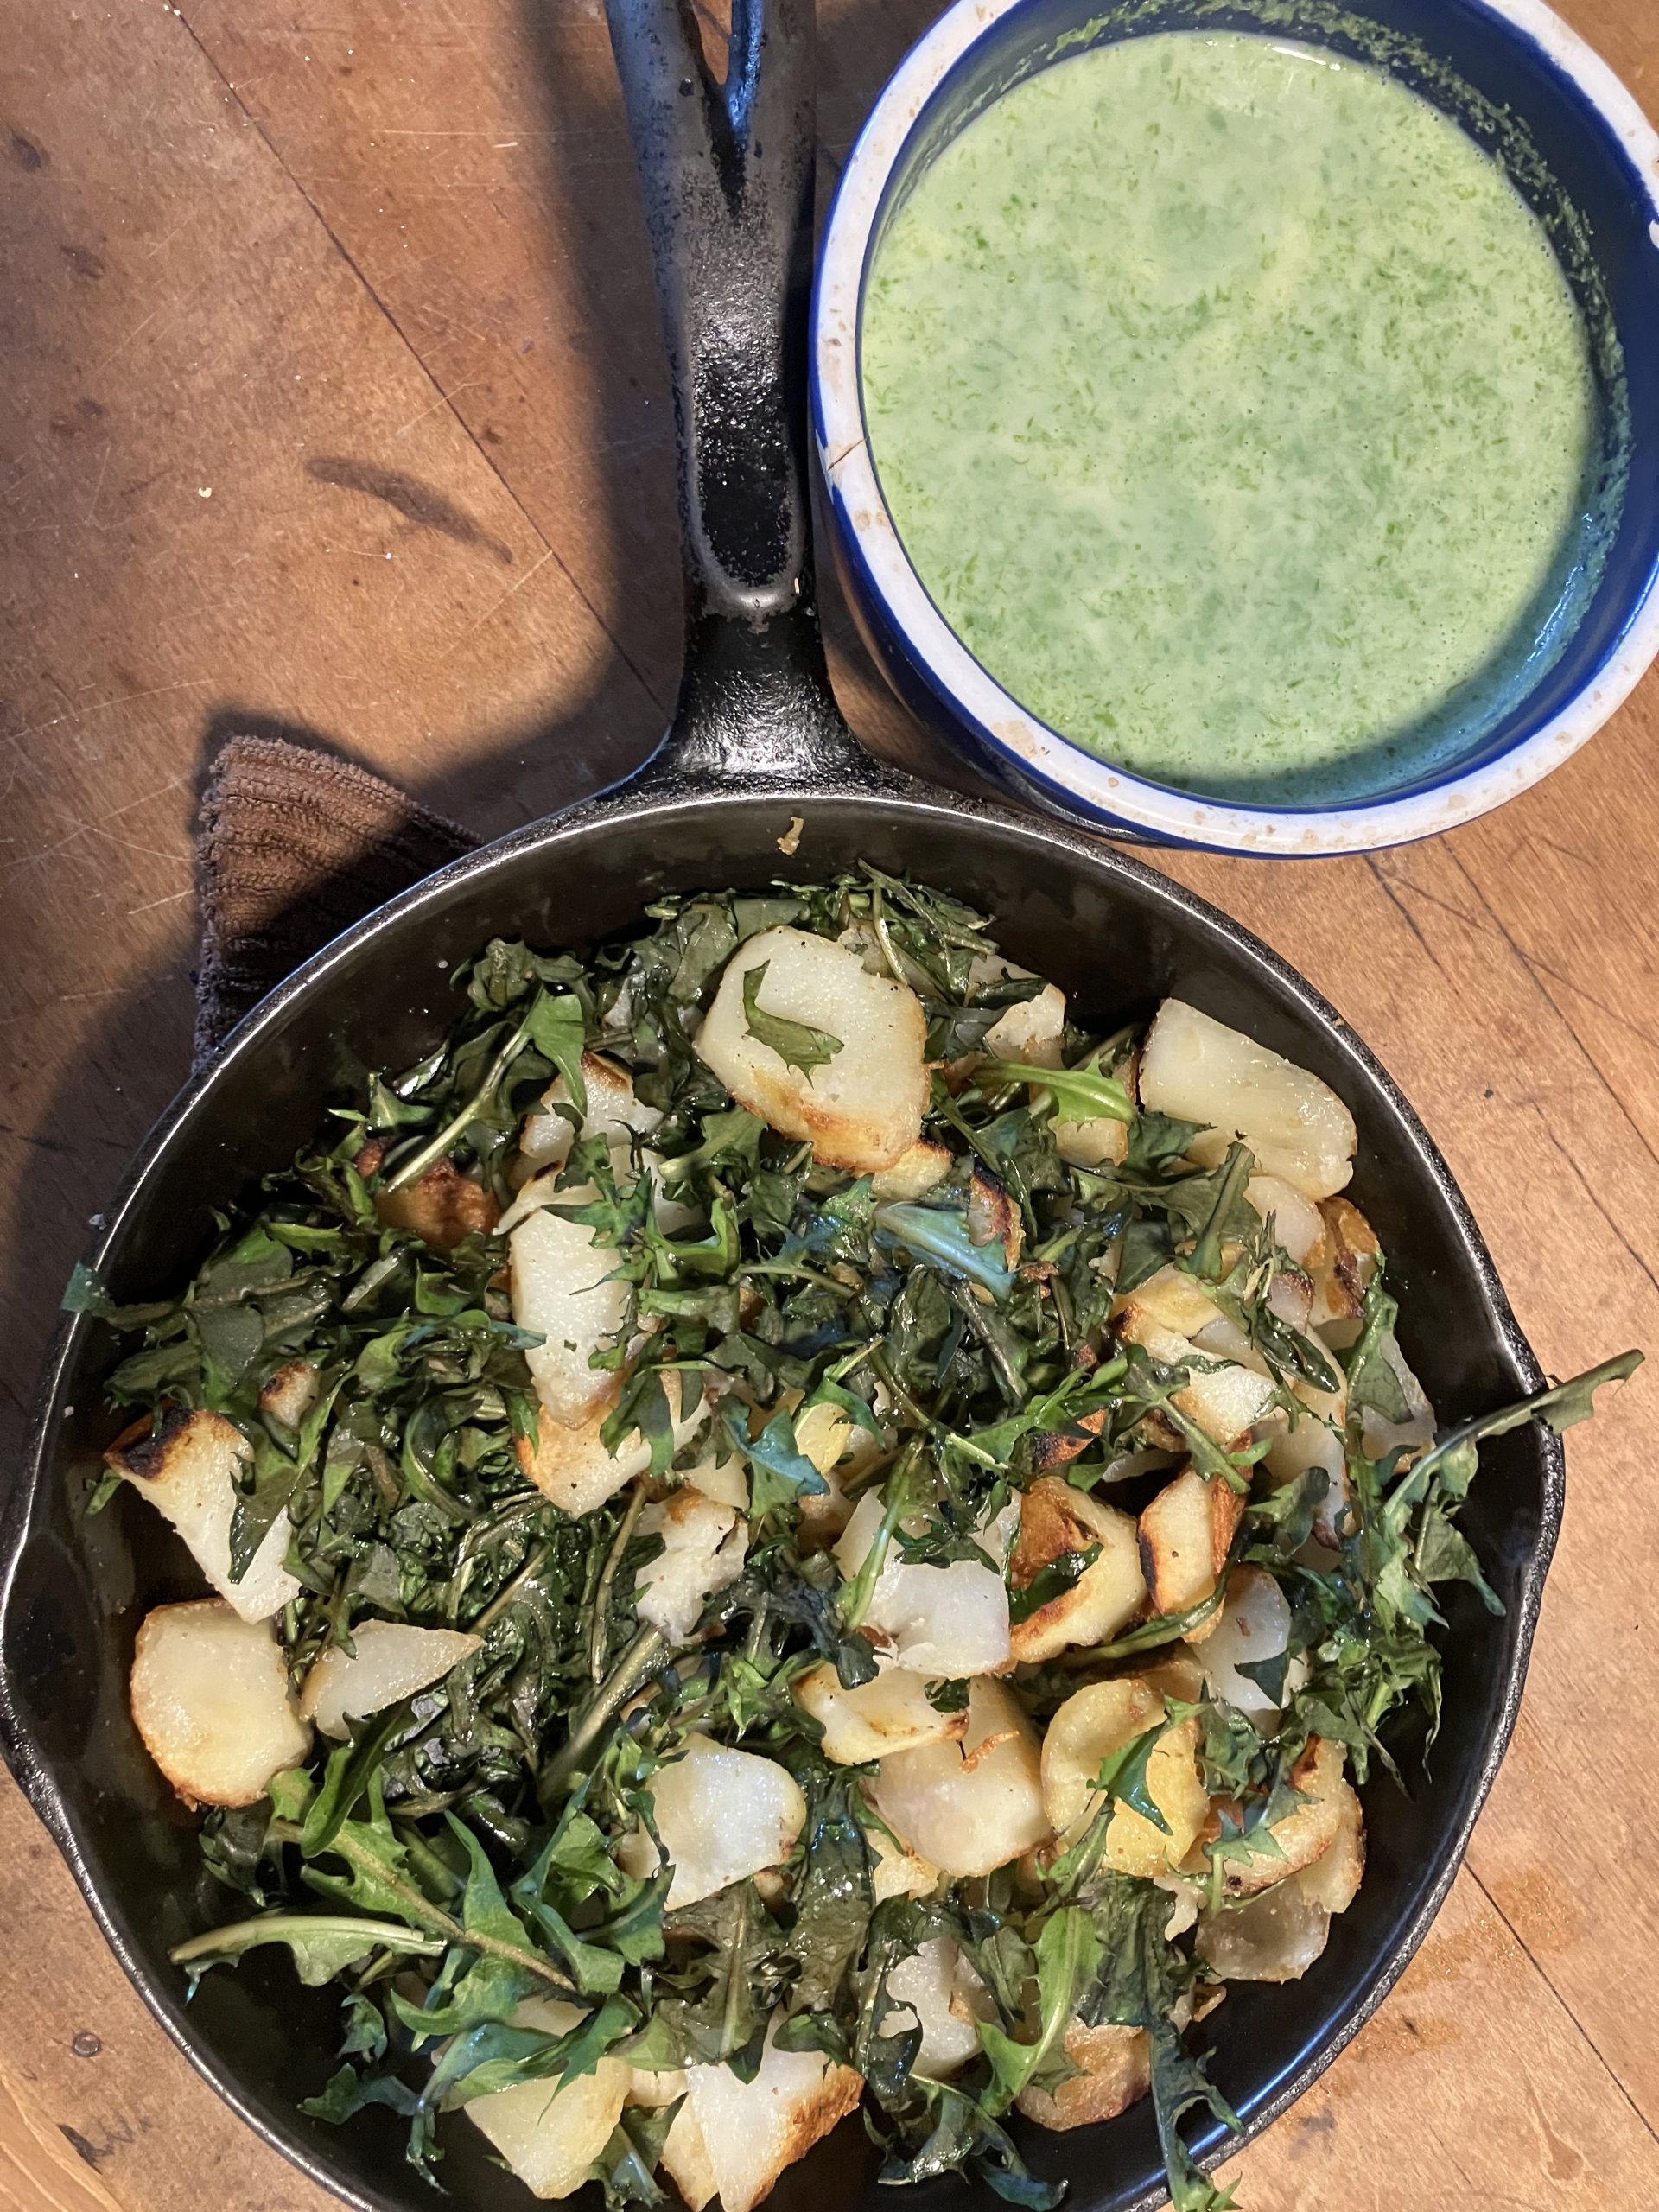 Best-Carolyn-Nettle-soup-and-dandelions-with-poatoes